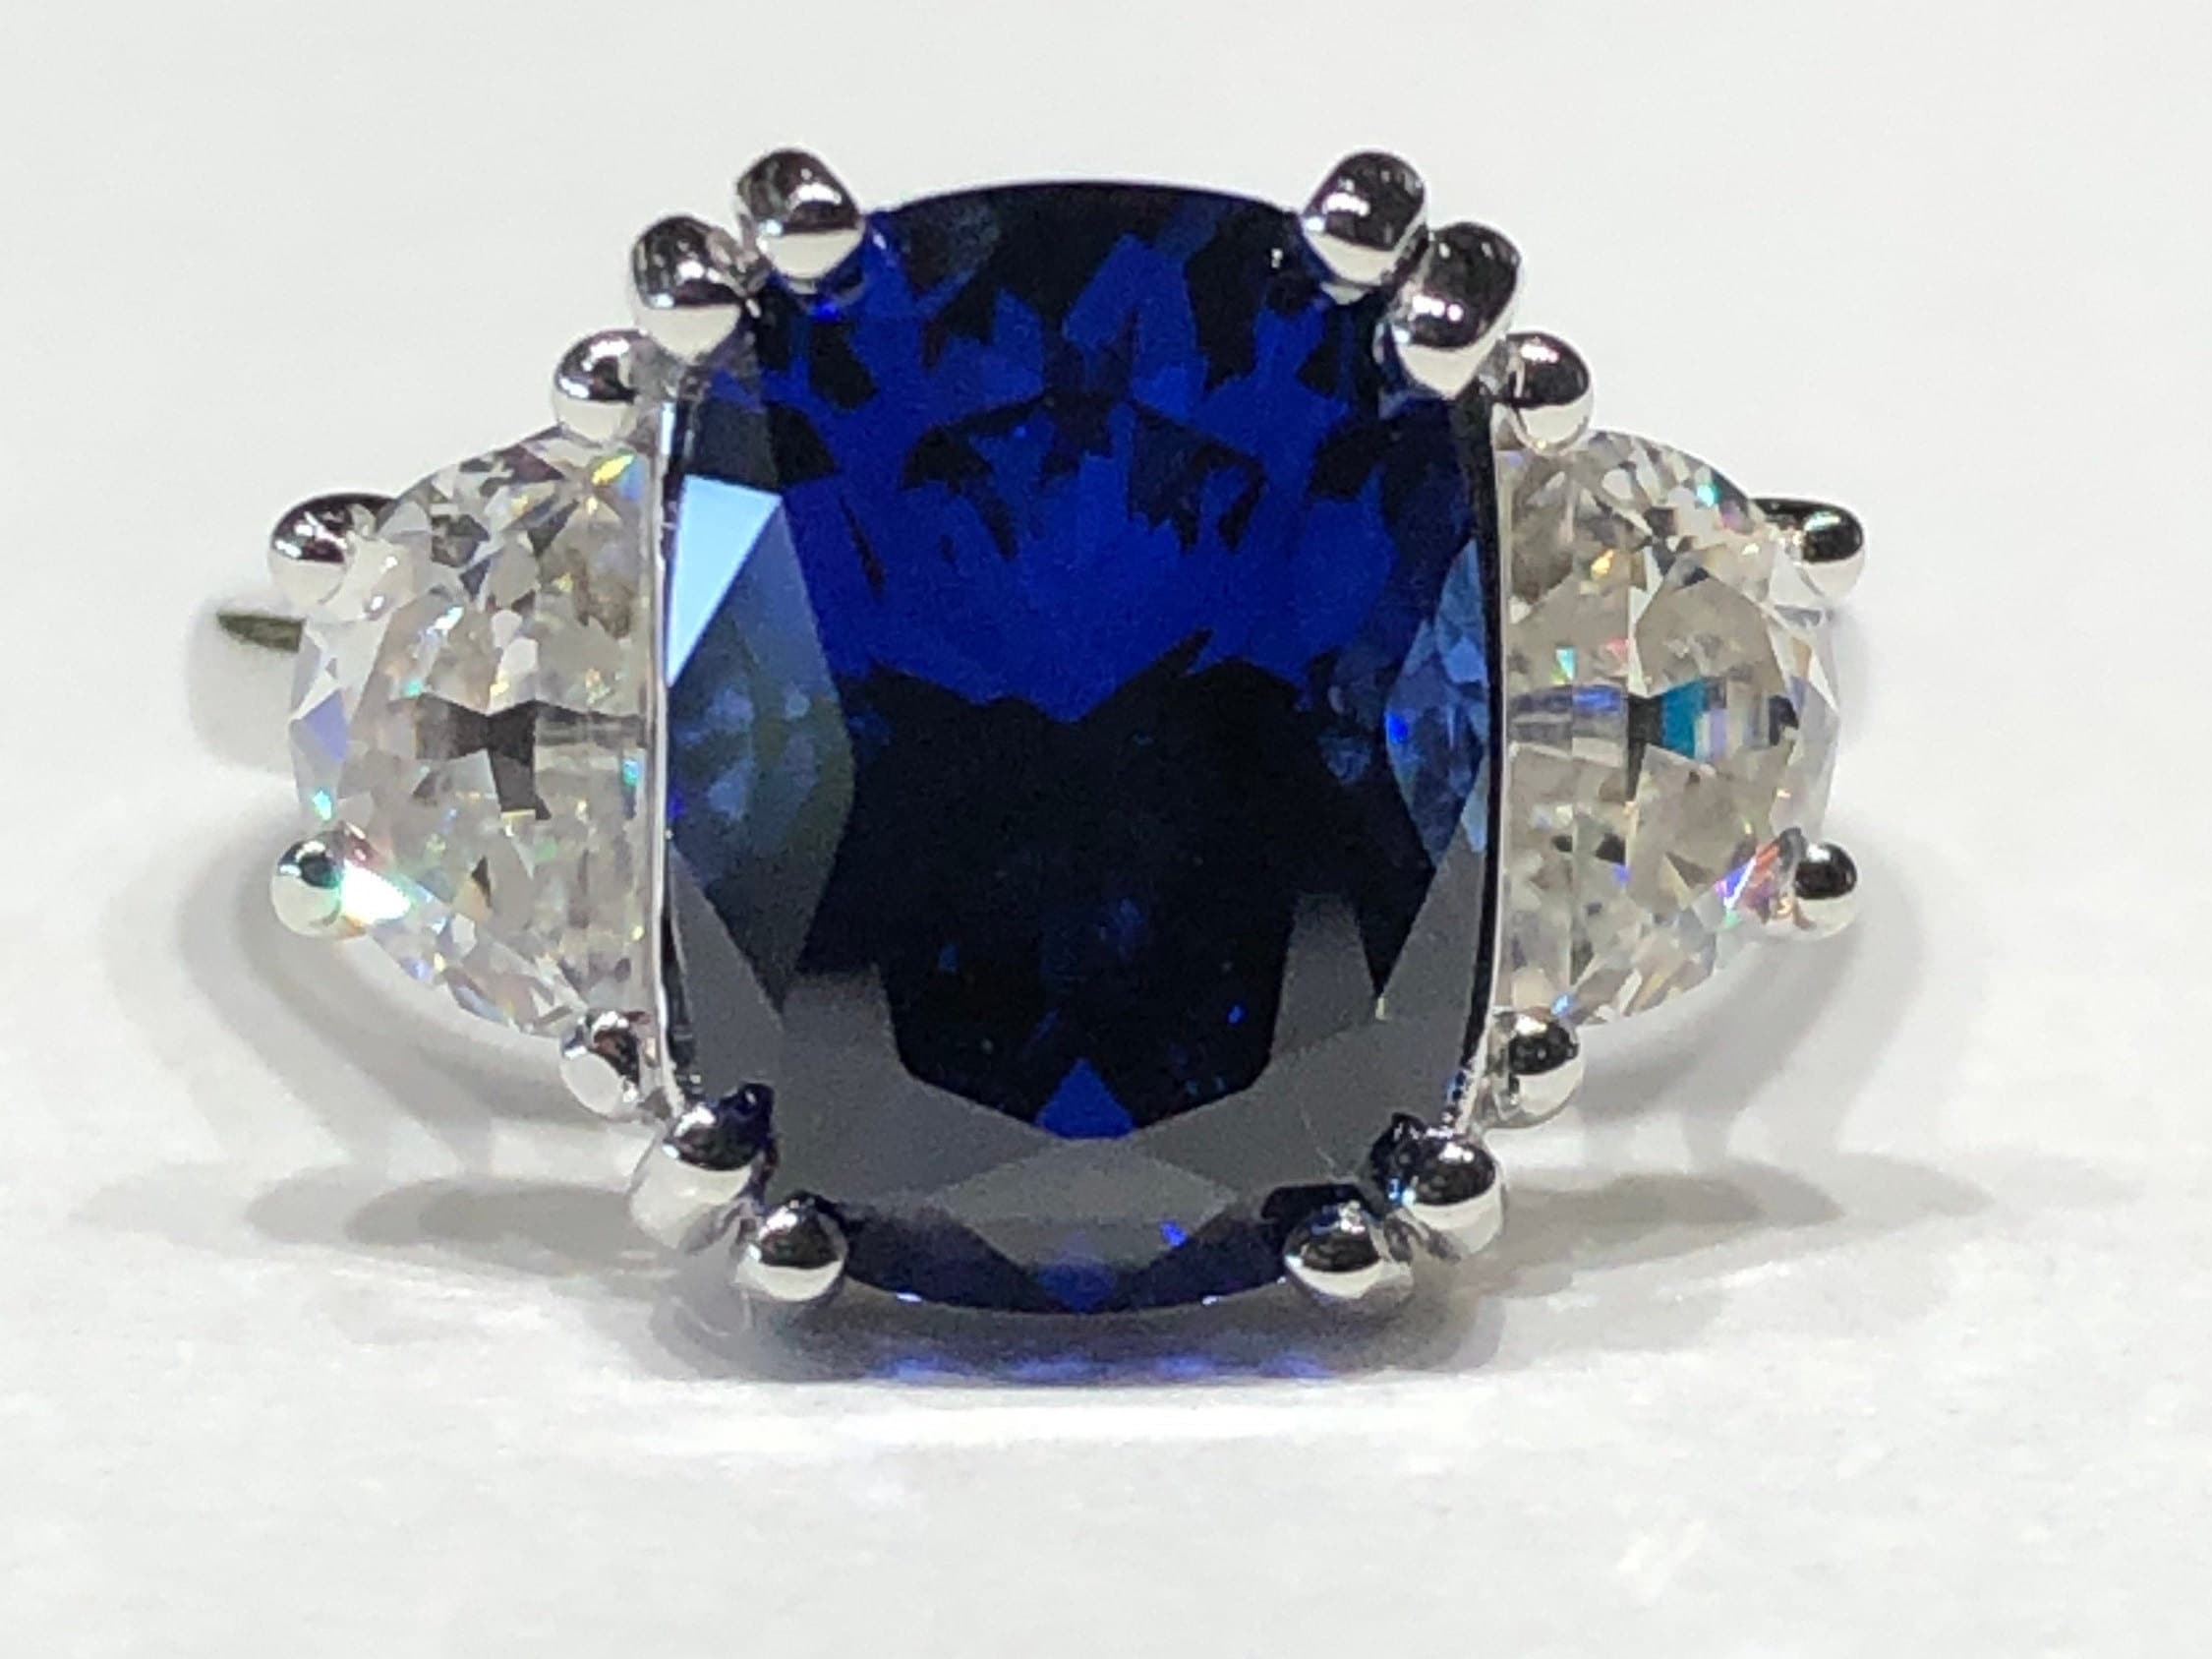 The Reflection Engagement Ring with Half Moon Cut Diamonds and Sapphires